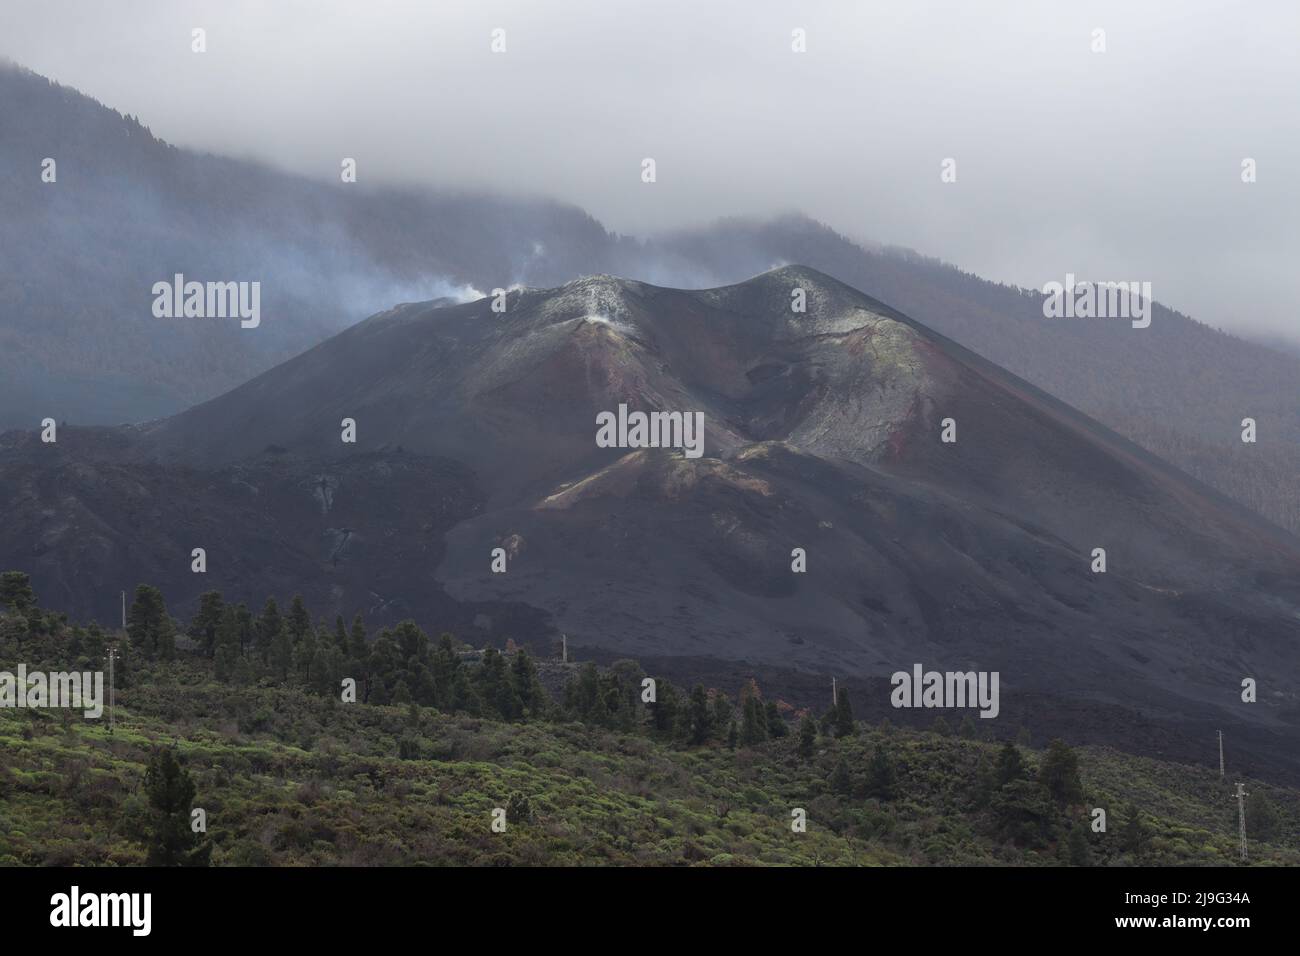 Volcano on the Cumbre Vieja Volcanic Ridge on the island of La Palma, Canary islands. Photographed 198 days after it first erupted in September 2021 Stock Photo